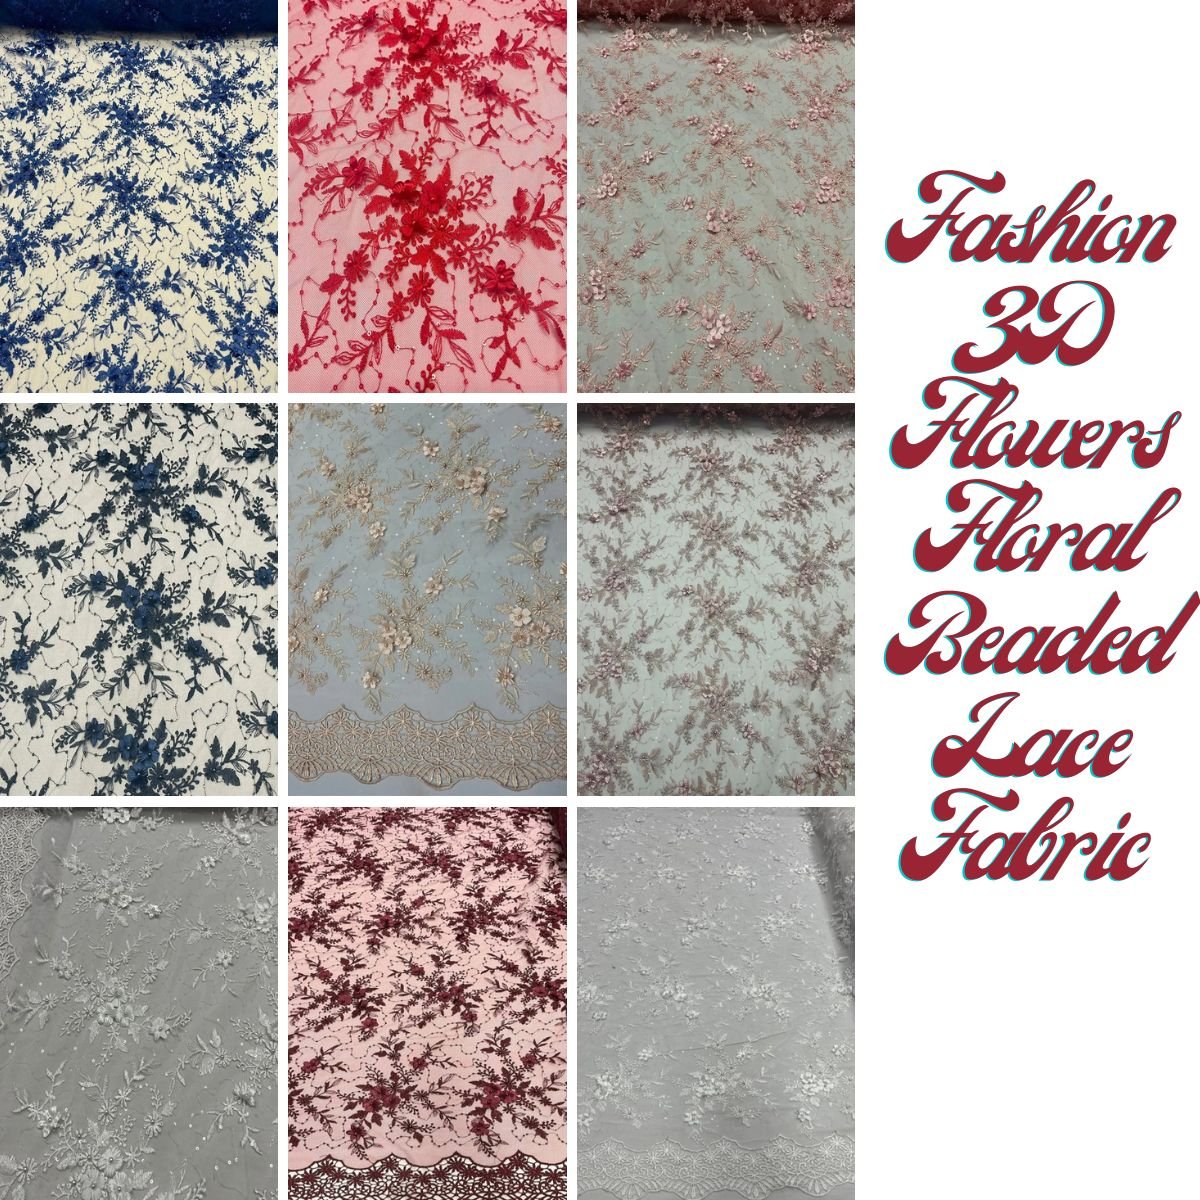 Fashion 3D Flowers Floral Beaded Lace FabricICE FABRICSICE FABRICSBy The Yard50" WideBurgundyFashion 3D Flowers Floral Beaded Lace Fabric ICE FABRICS